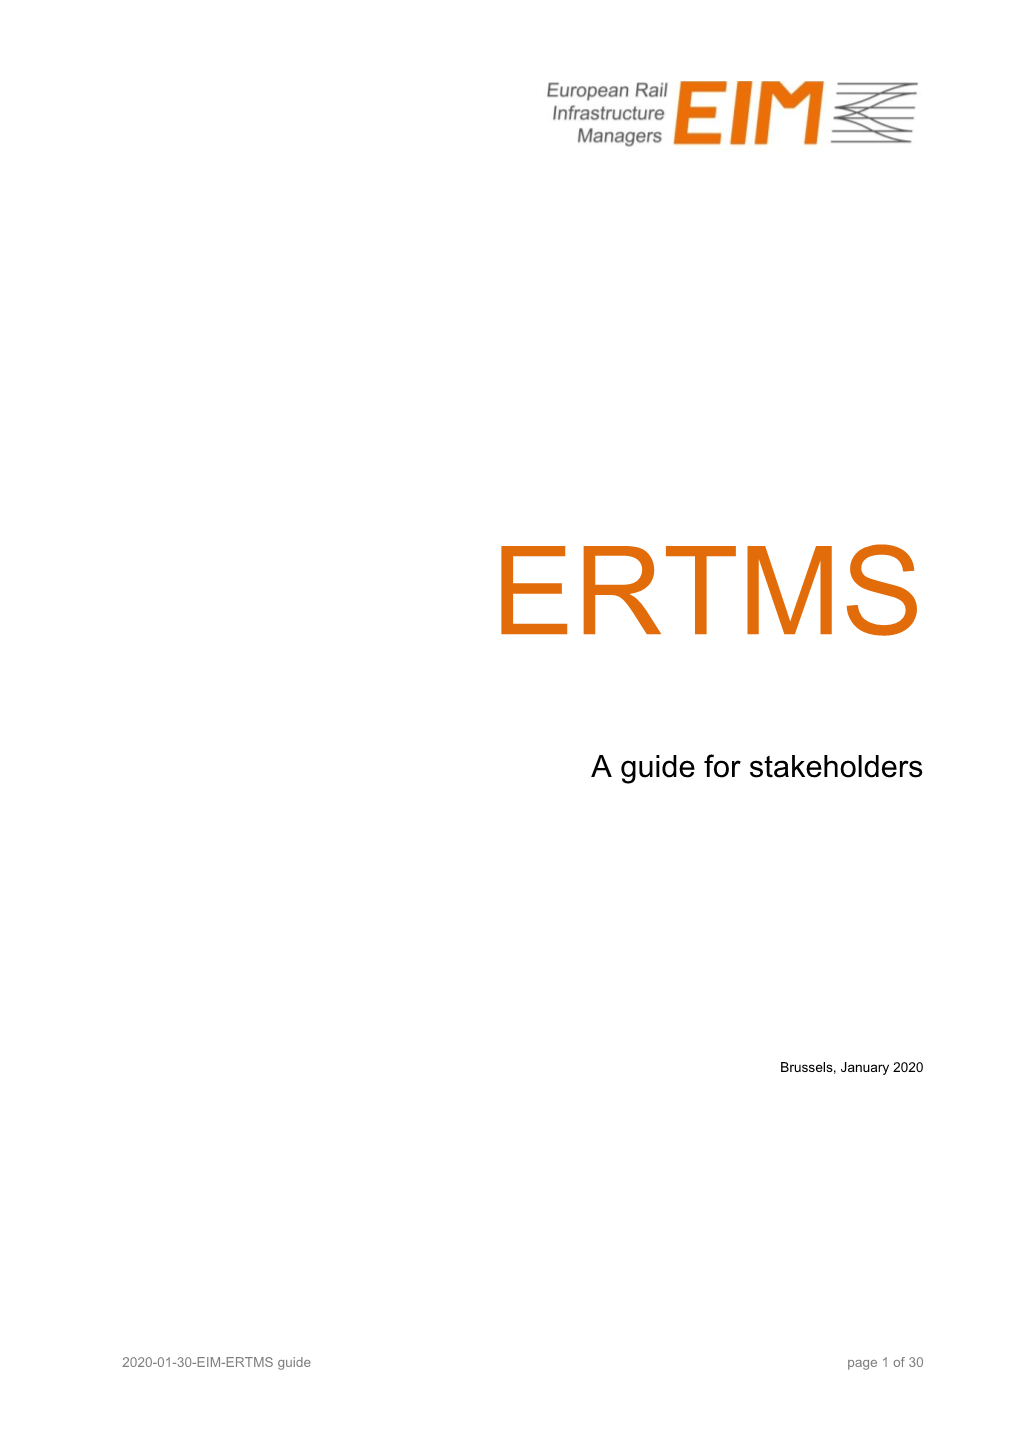 ERTMS – a Guide for Stakeholders